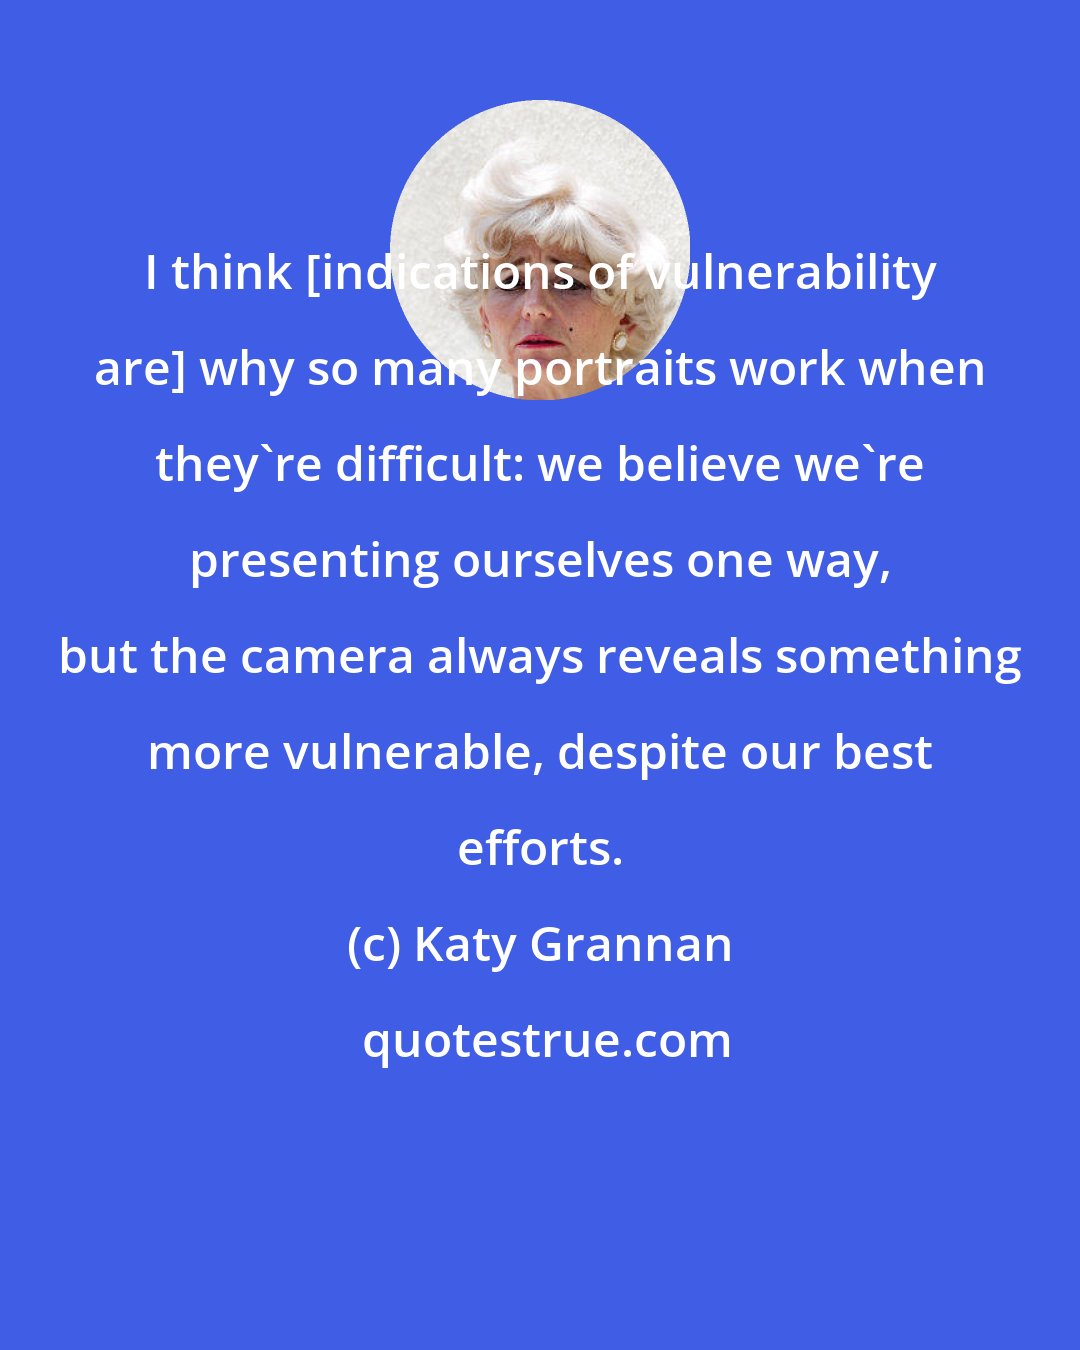 Katy Grannan: I think [indications of vulnerability are] why so many portraits work when they're difficult: we believe we're presenting ourselves one way, but the camera always reveals something more vulnerable, despite our best efforts.